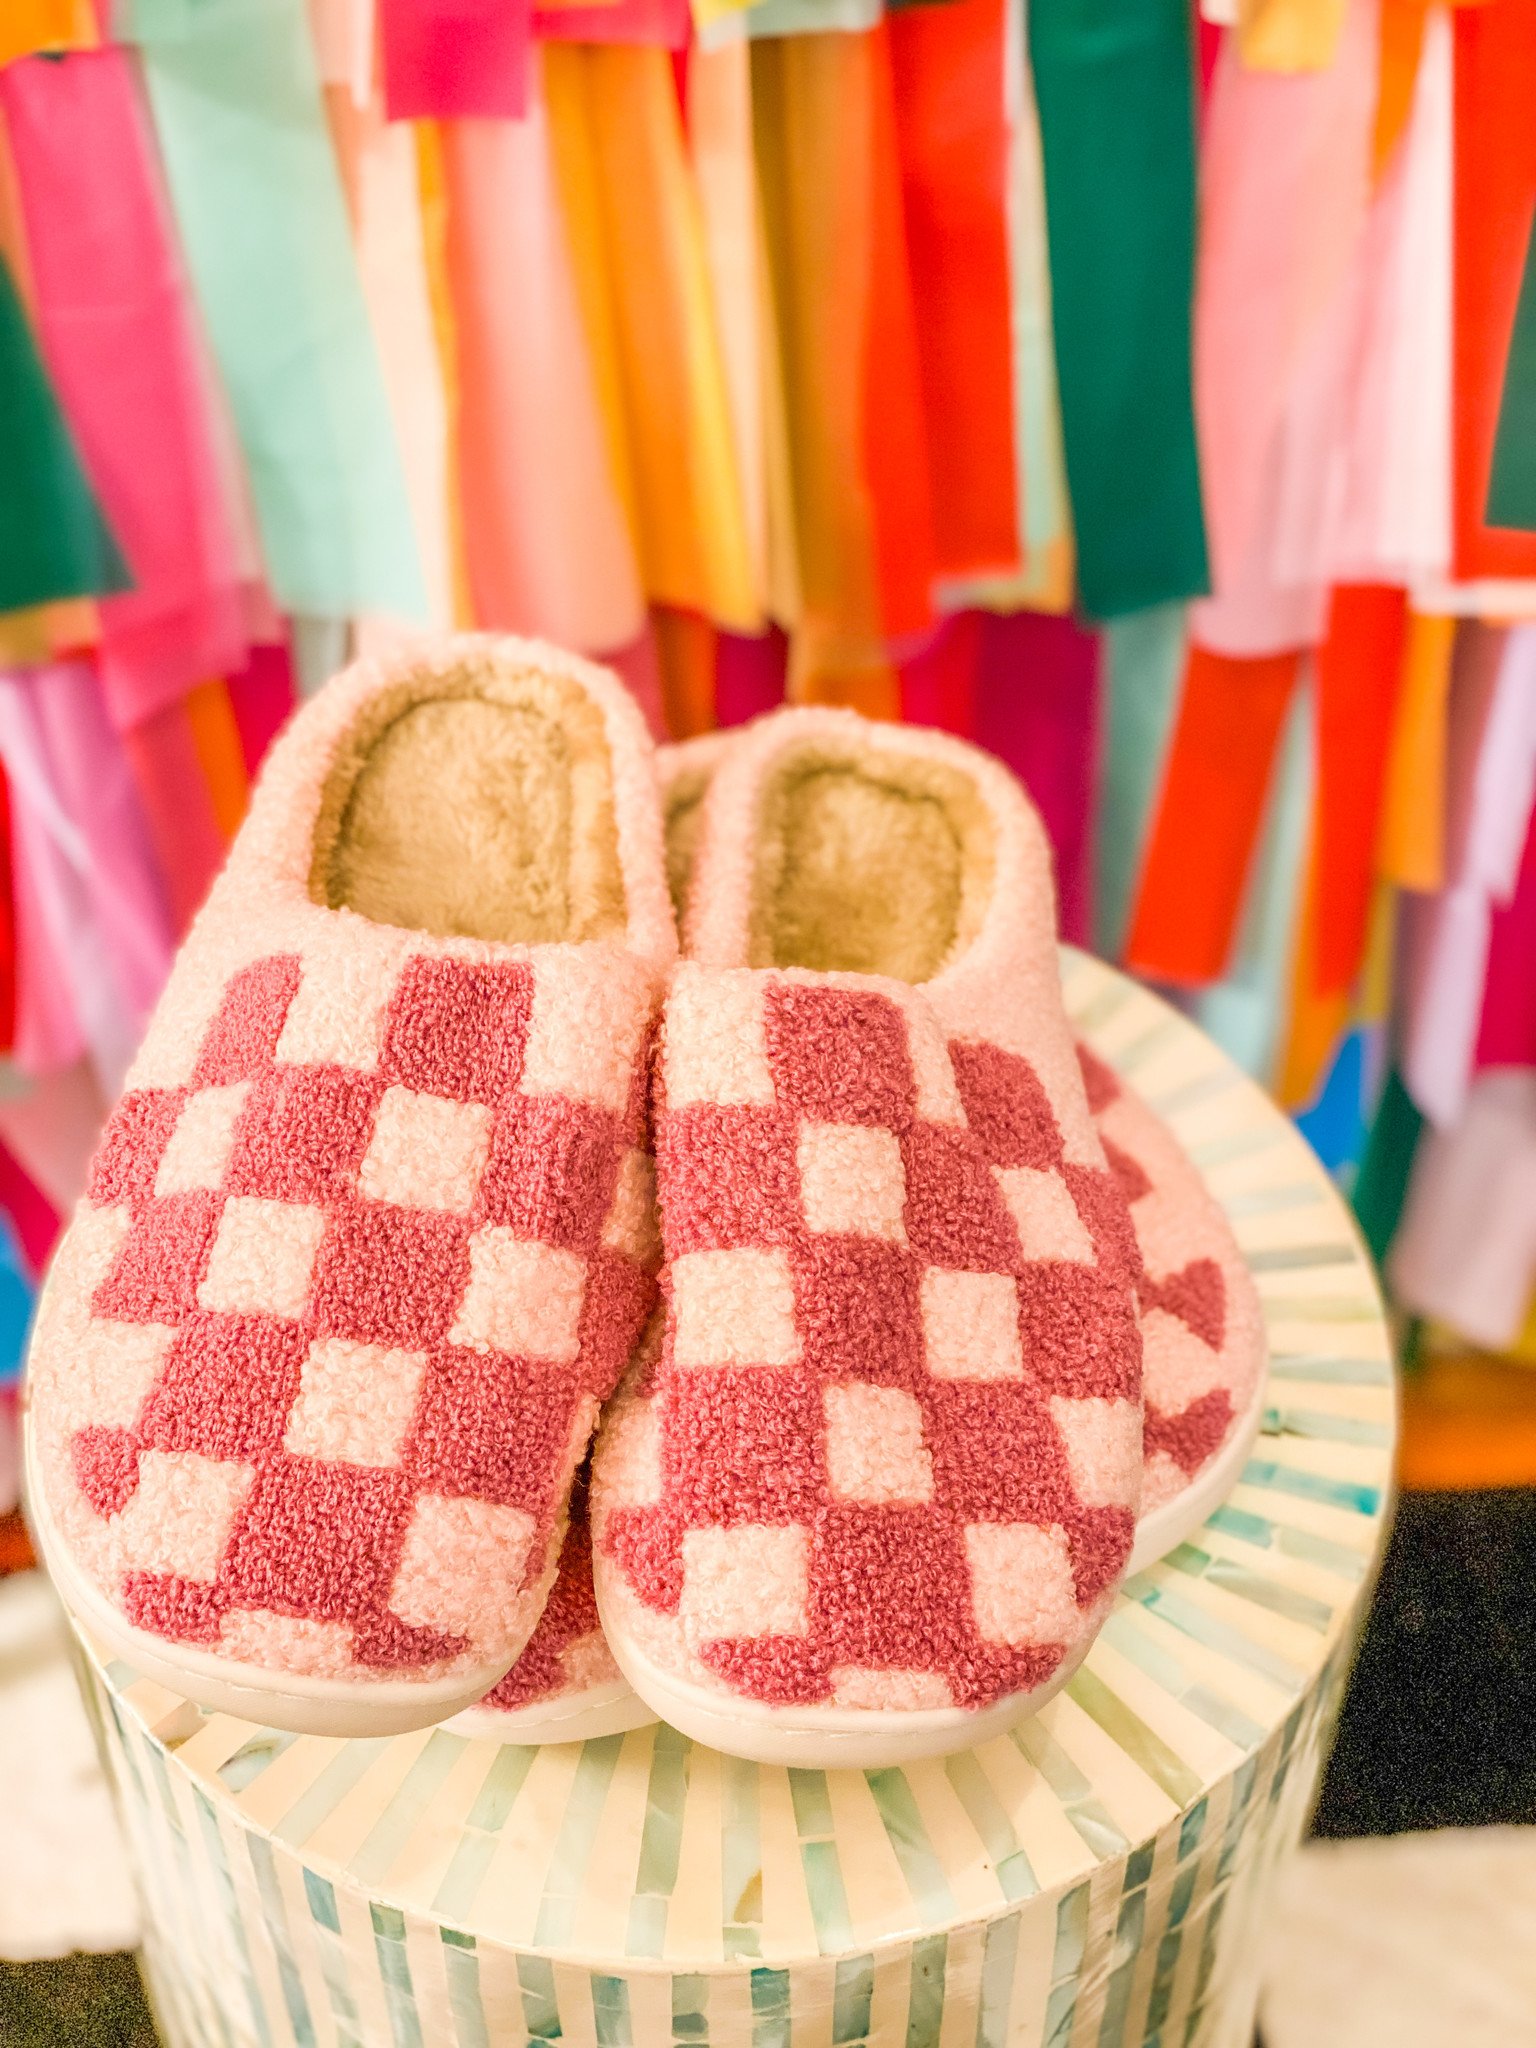 Slippers Pink Checkered